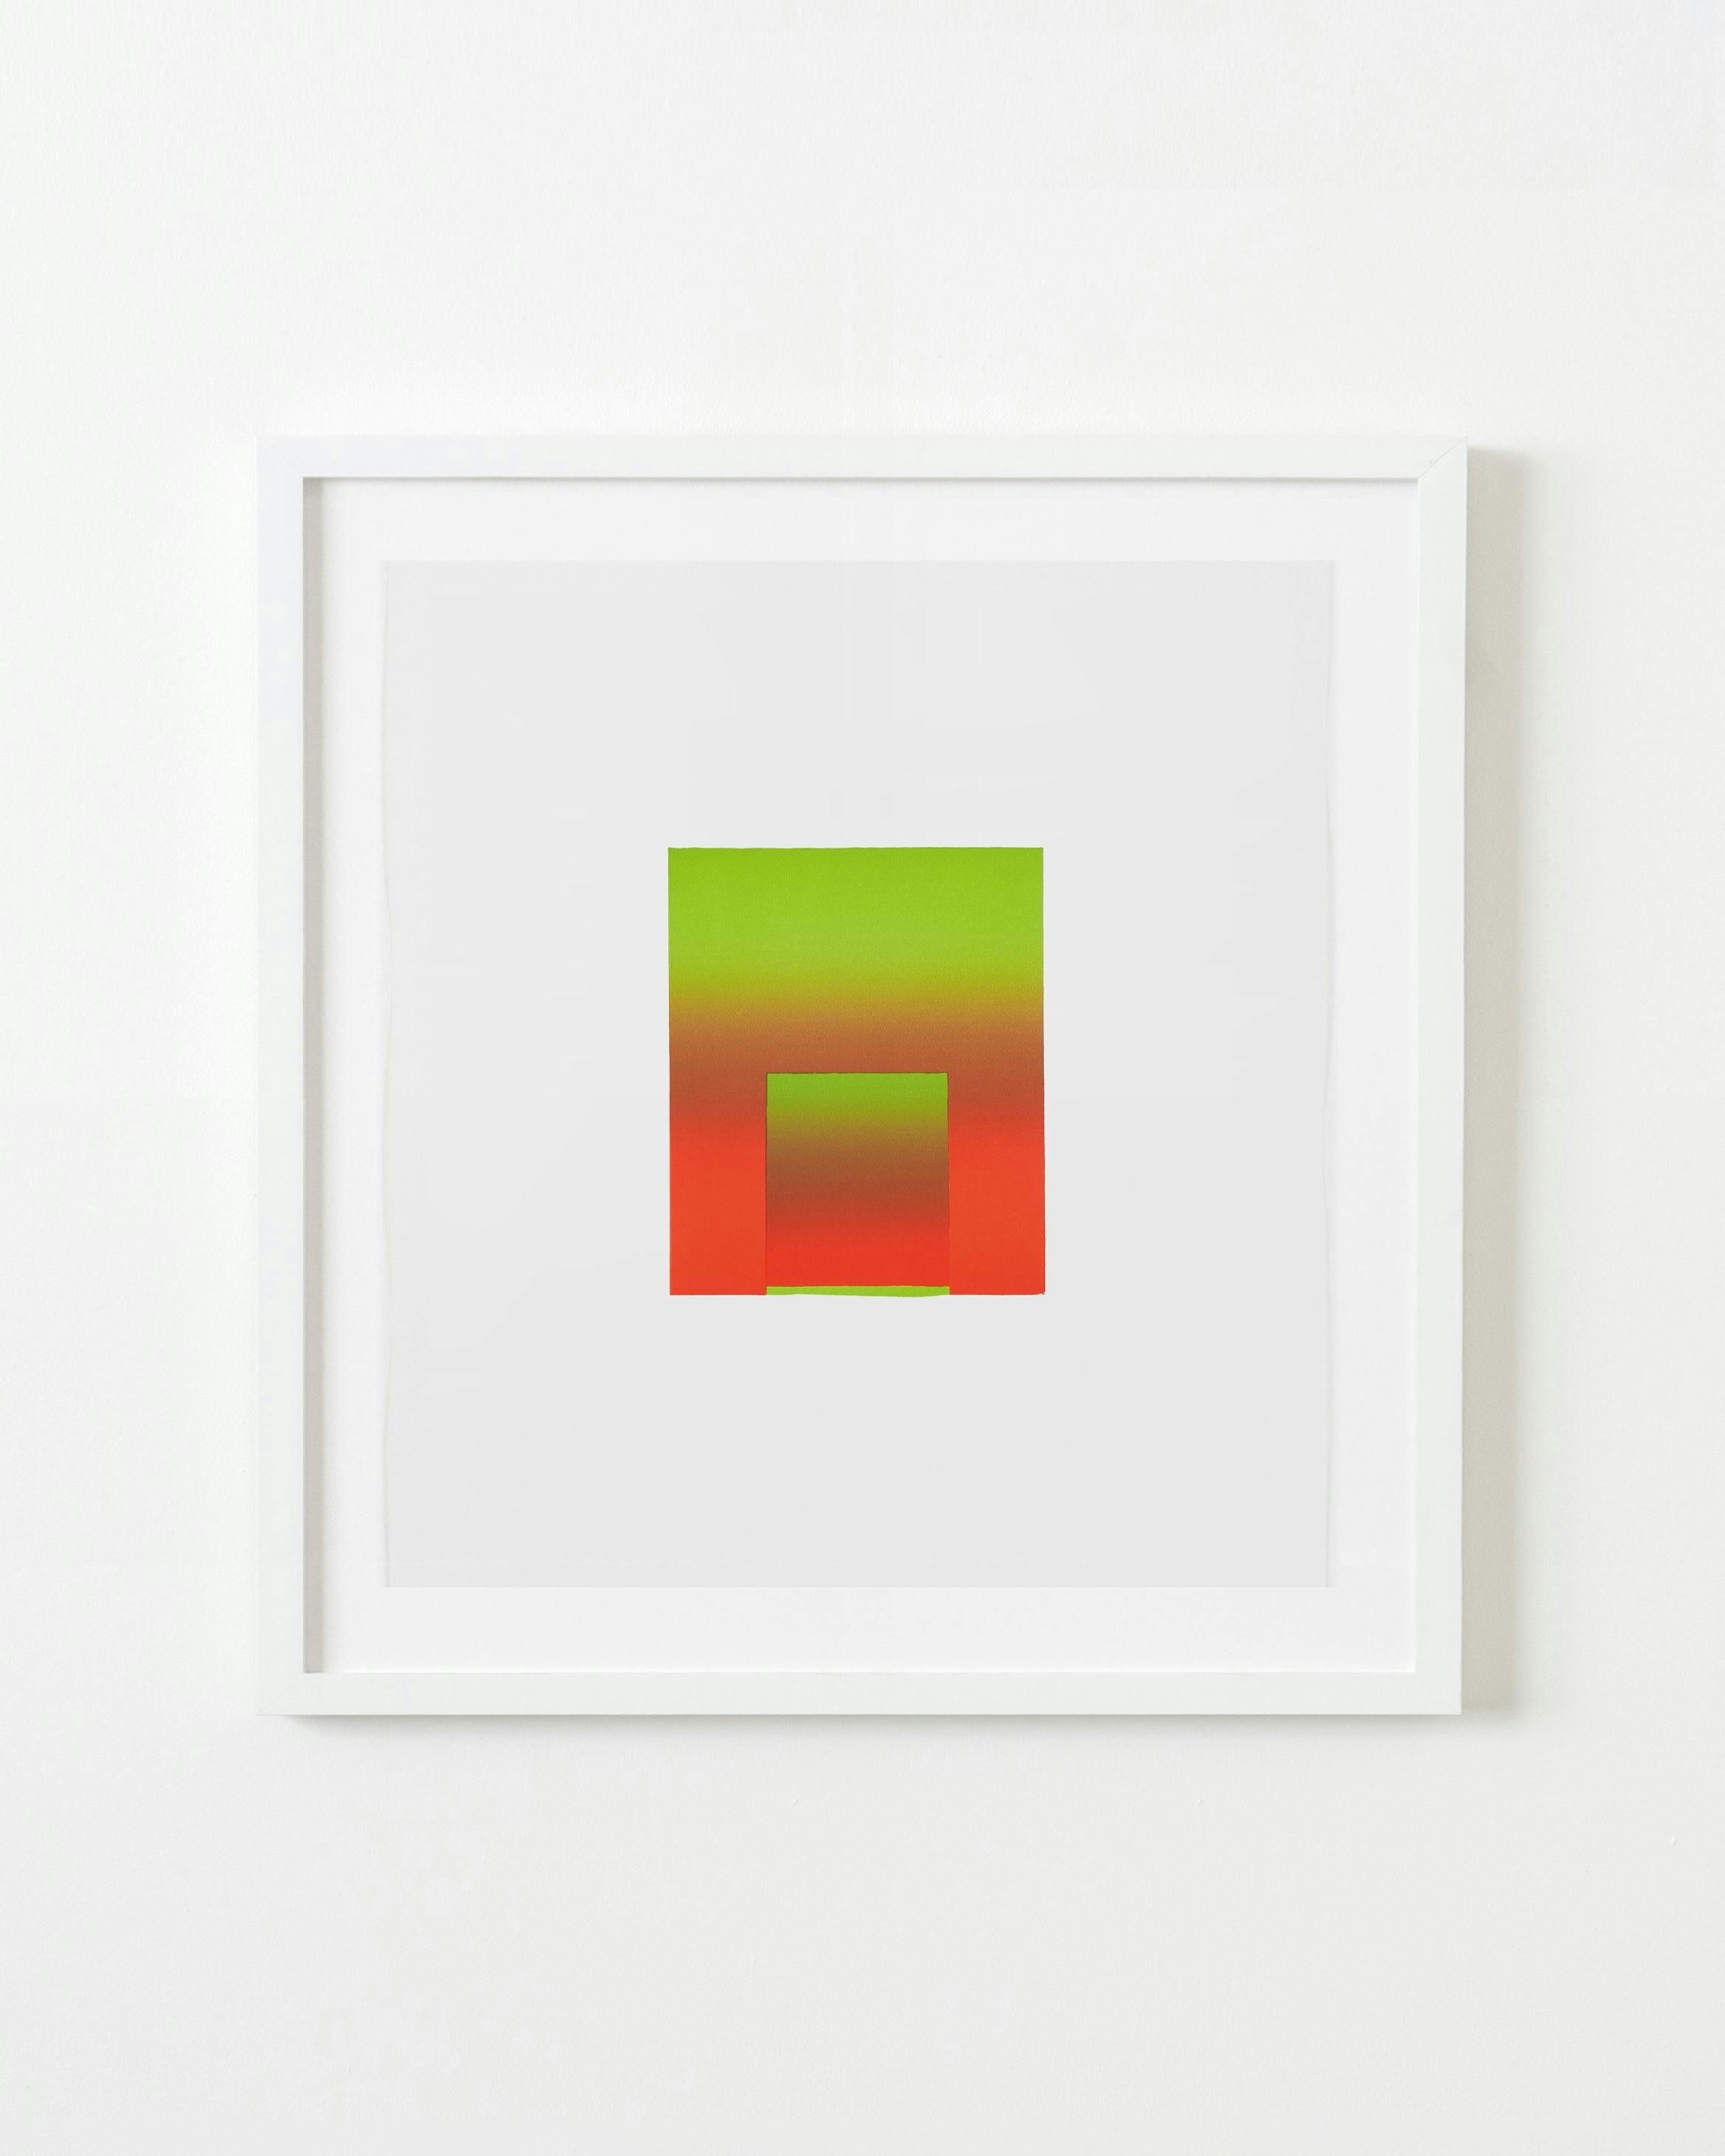 Print by Inka Bell titled "Bright Green and Red".